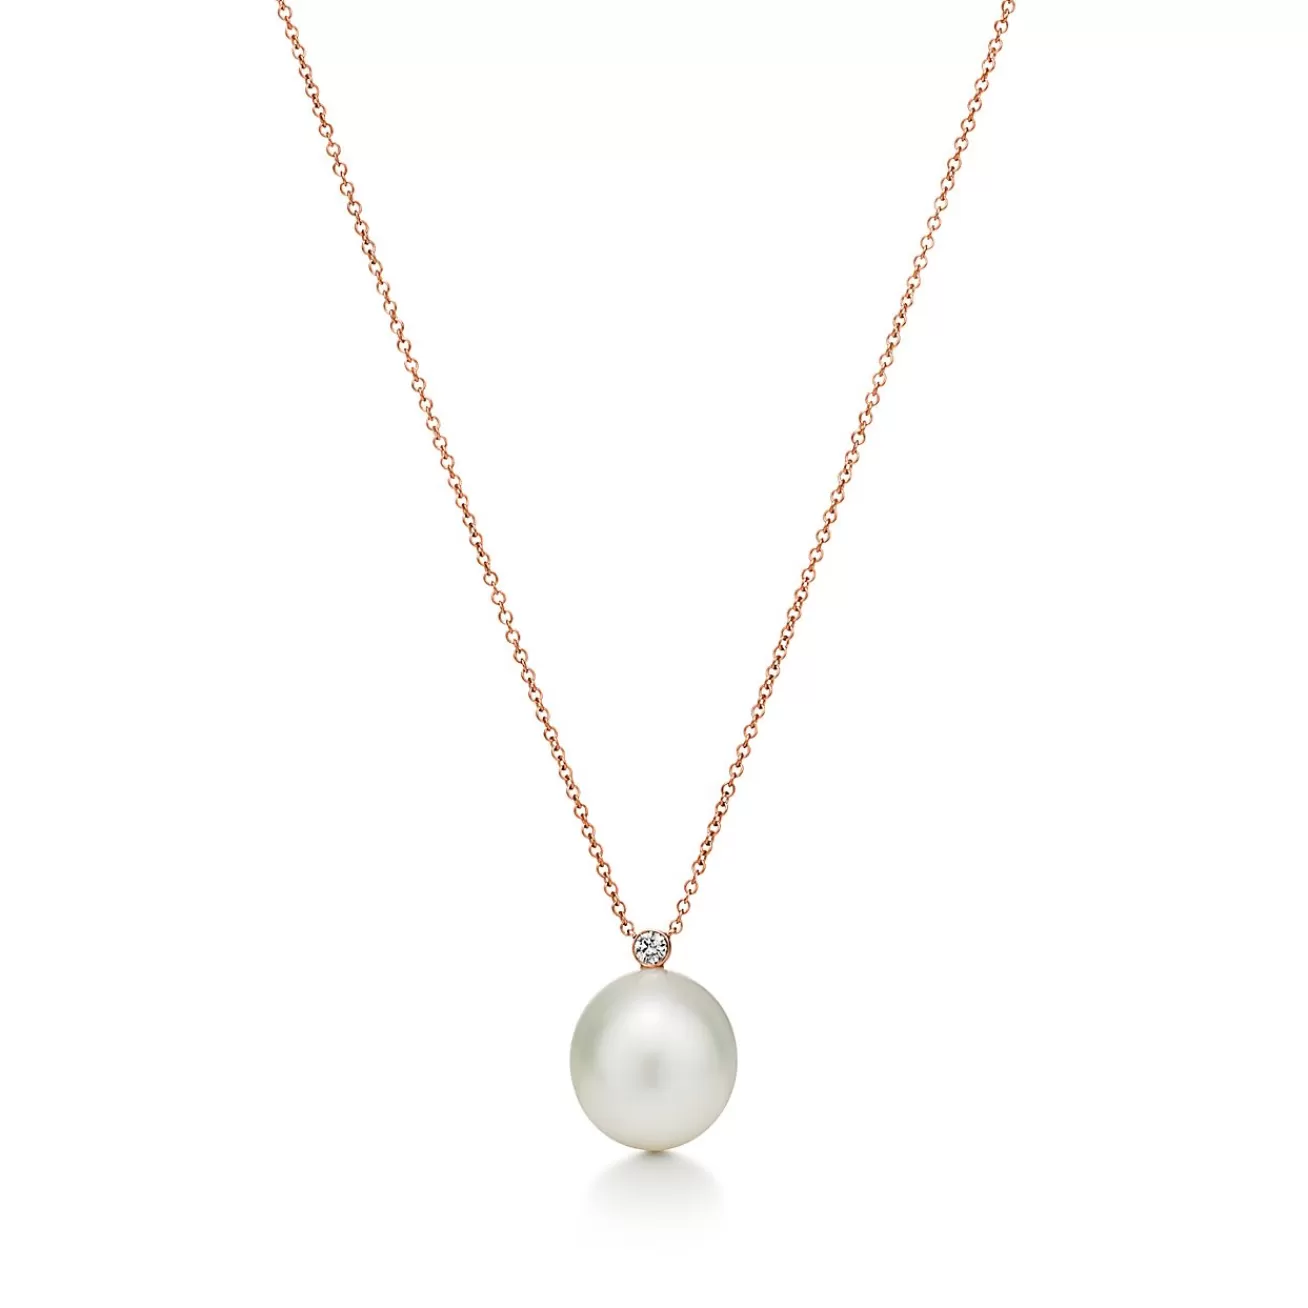 Tiffany & Co. Pendant in 18k rose gold with South Sea cultured pearls and diamonds. | ^ Necklaces & Pendants | Rose Gold Jewelry